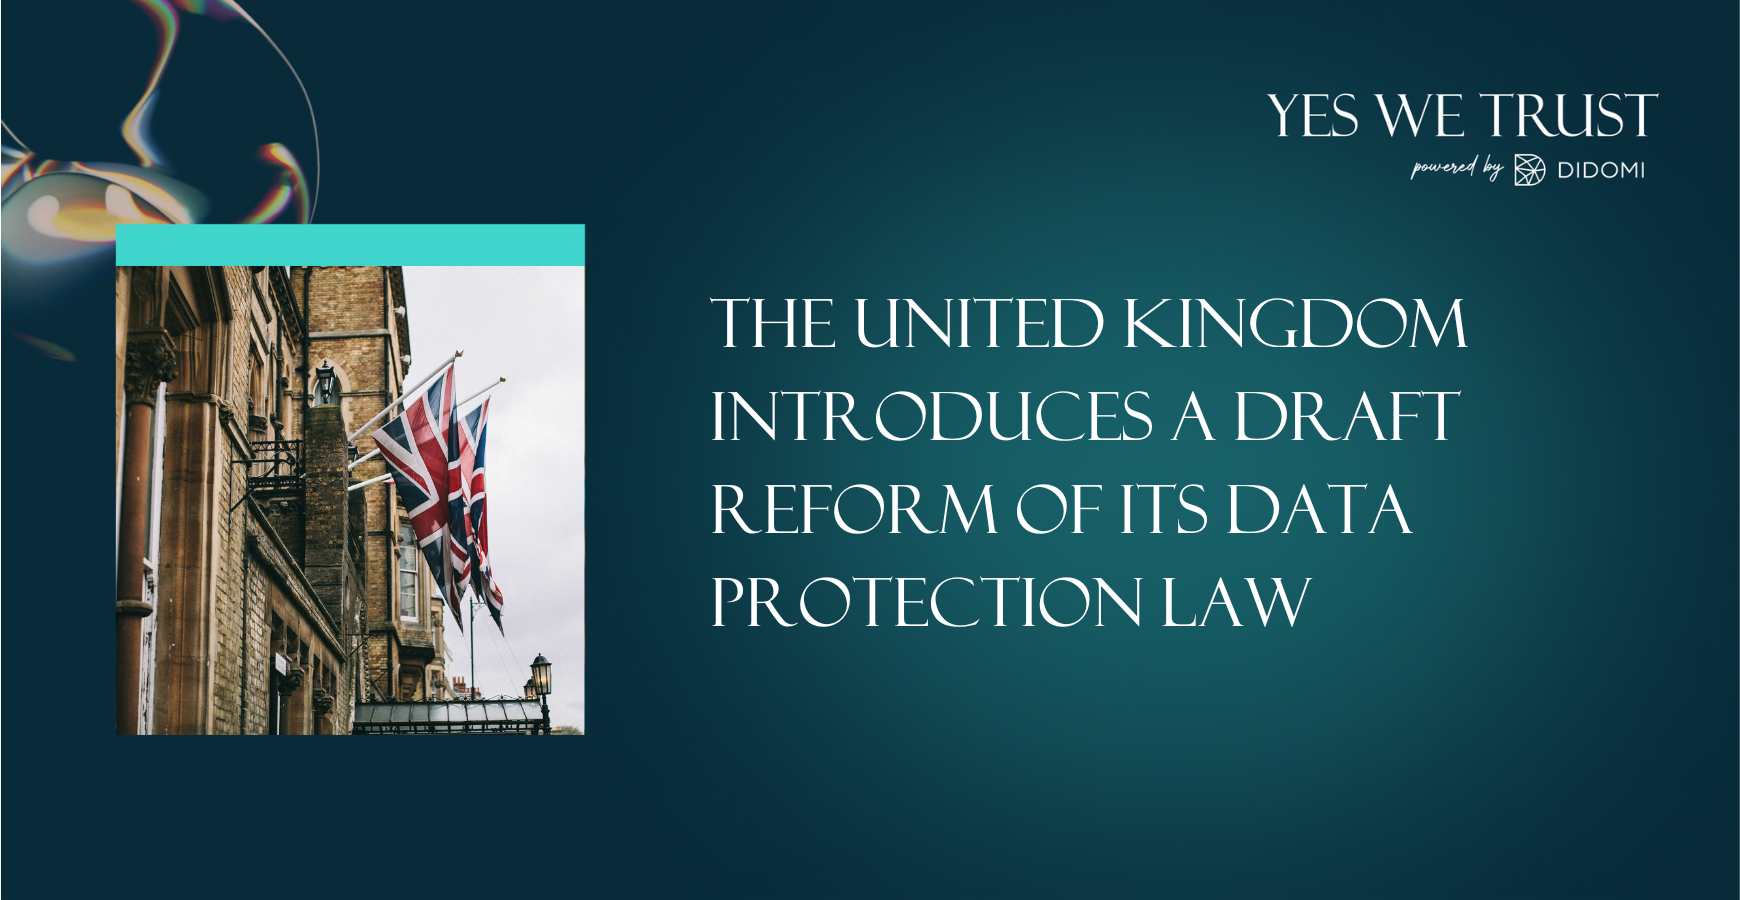 The United Kingdom introduces a draft reform of its data protection law